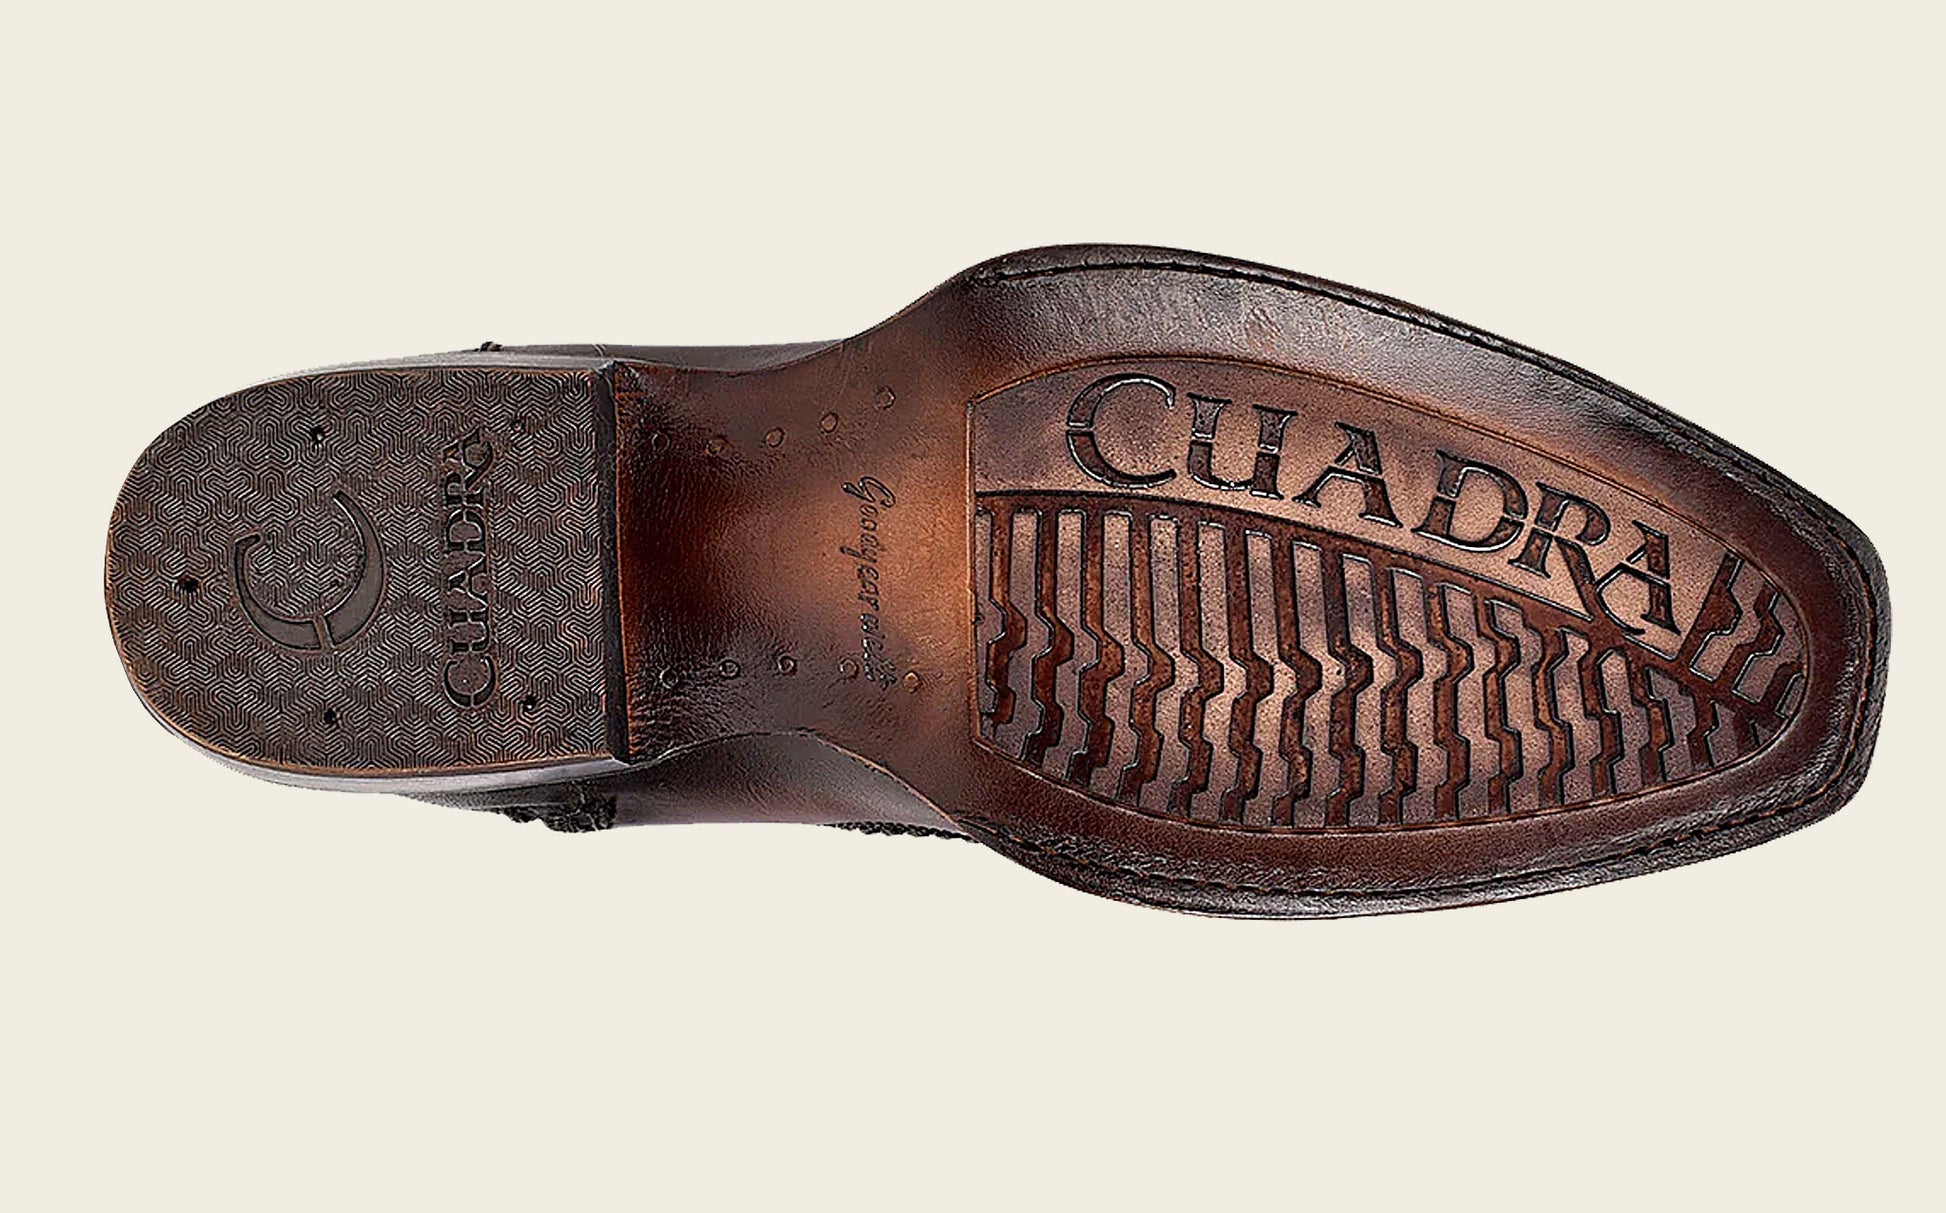 Leather Sole with TPU Grip: Cuadra boots offer stability & confidence. 